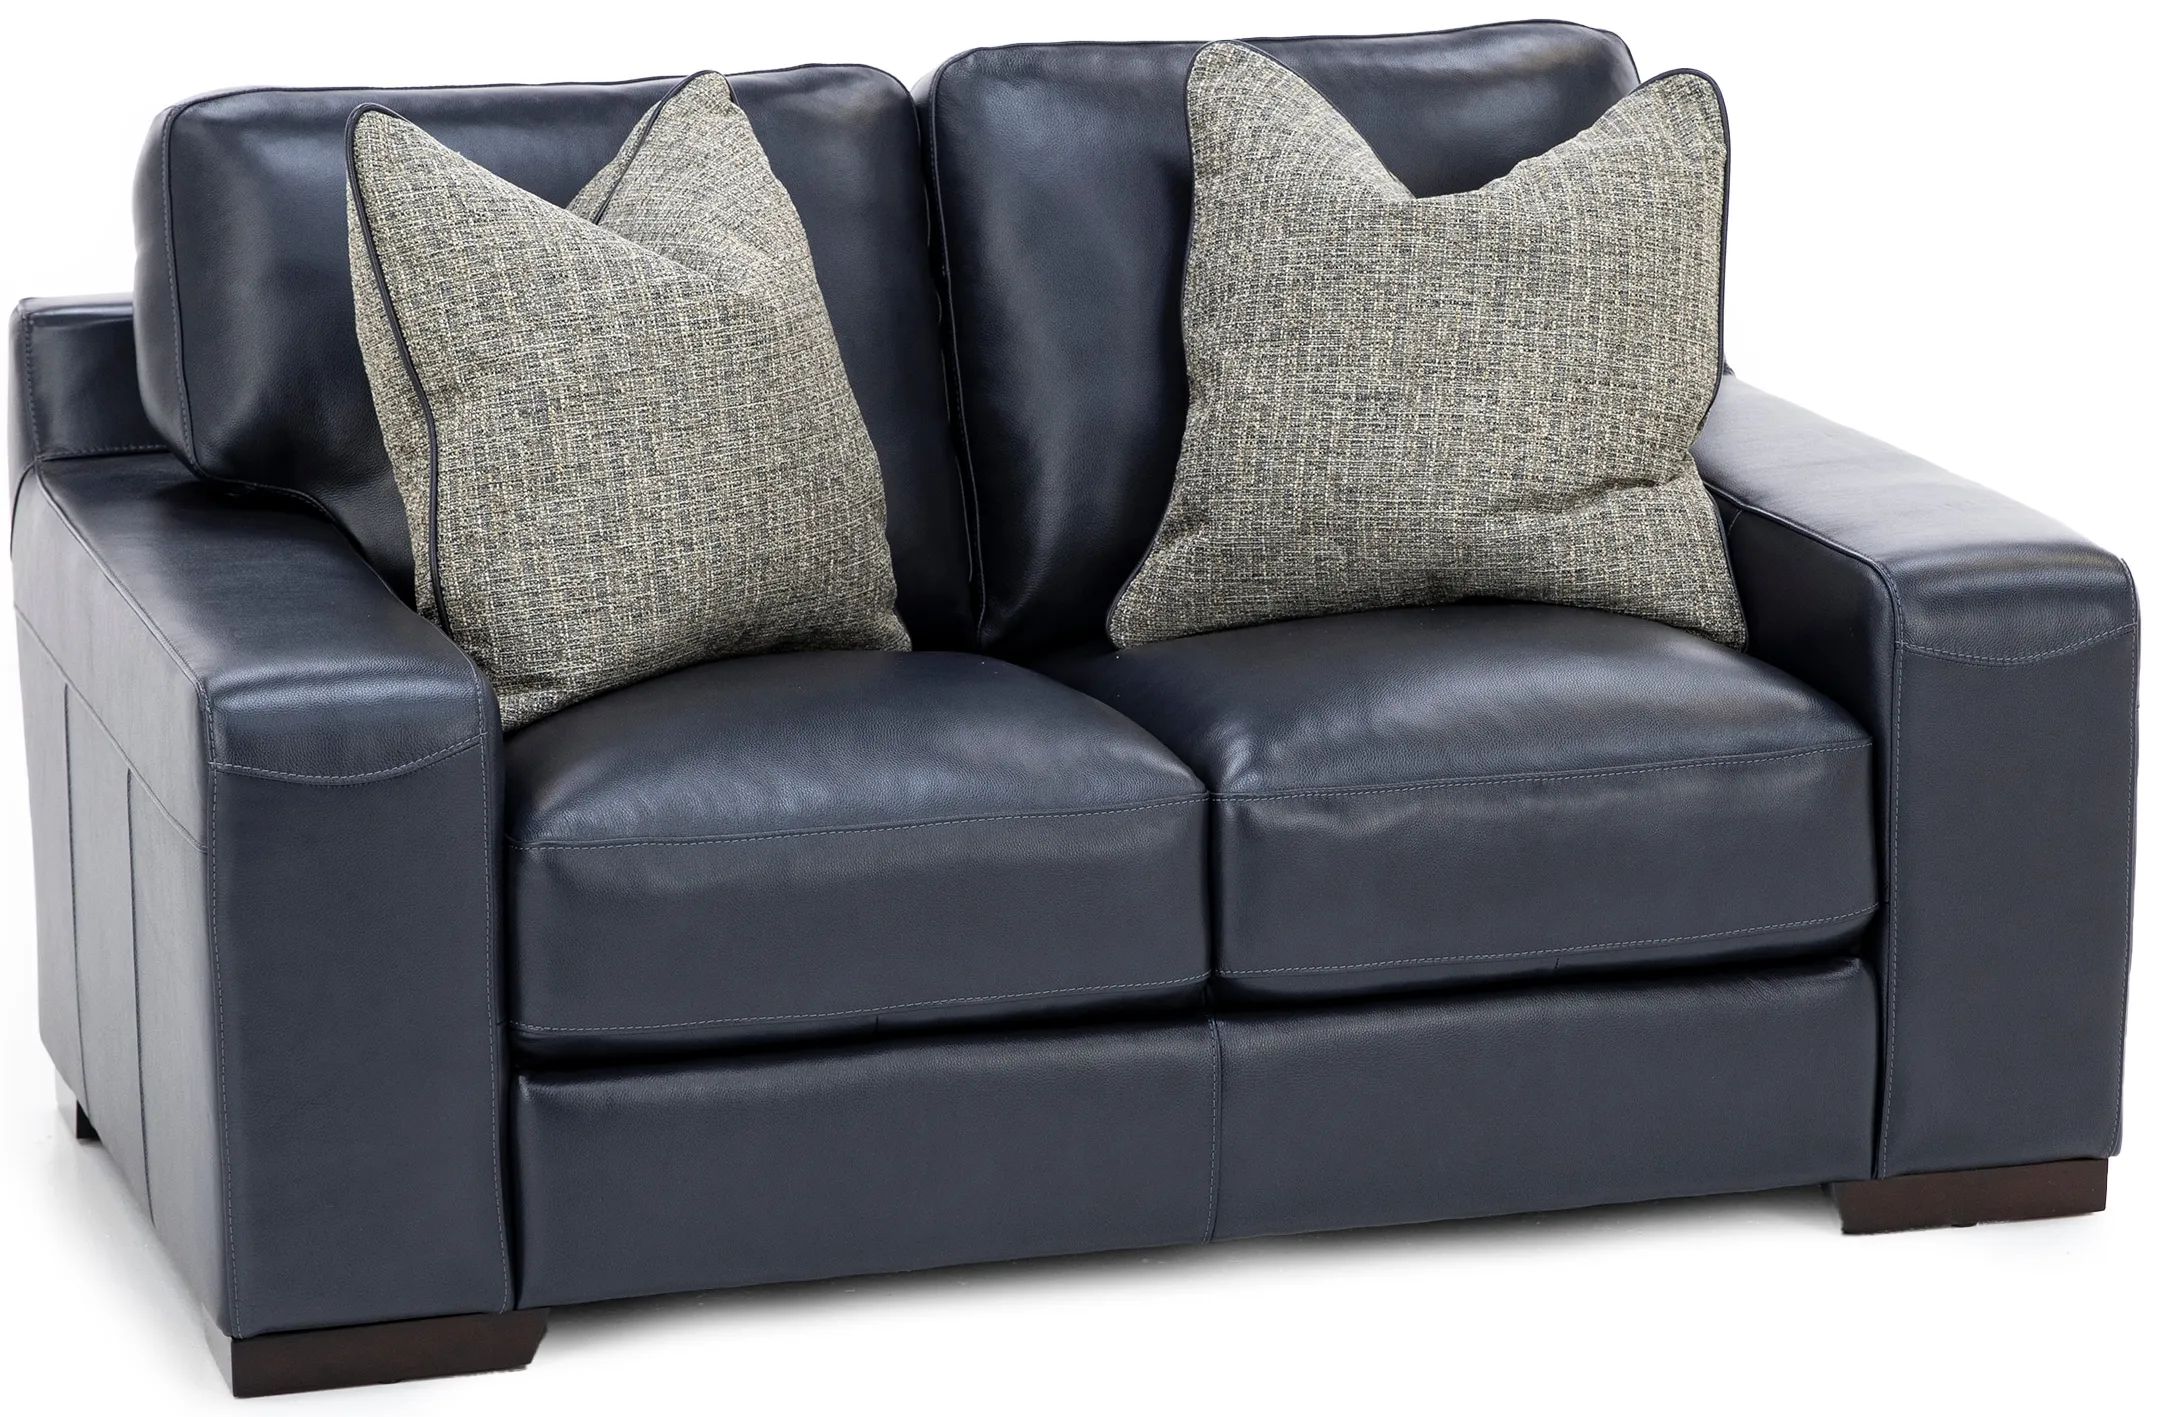 Everest Leather Loveseat With Wireless Charging in Deep Blue